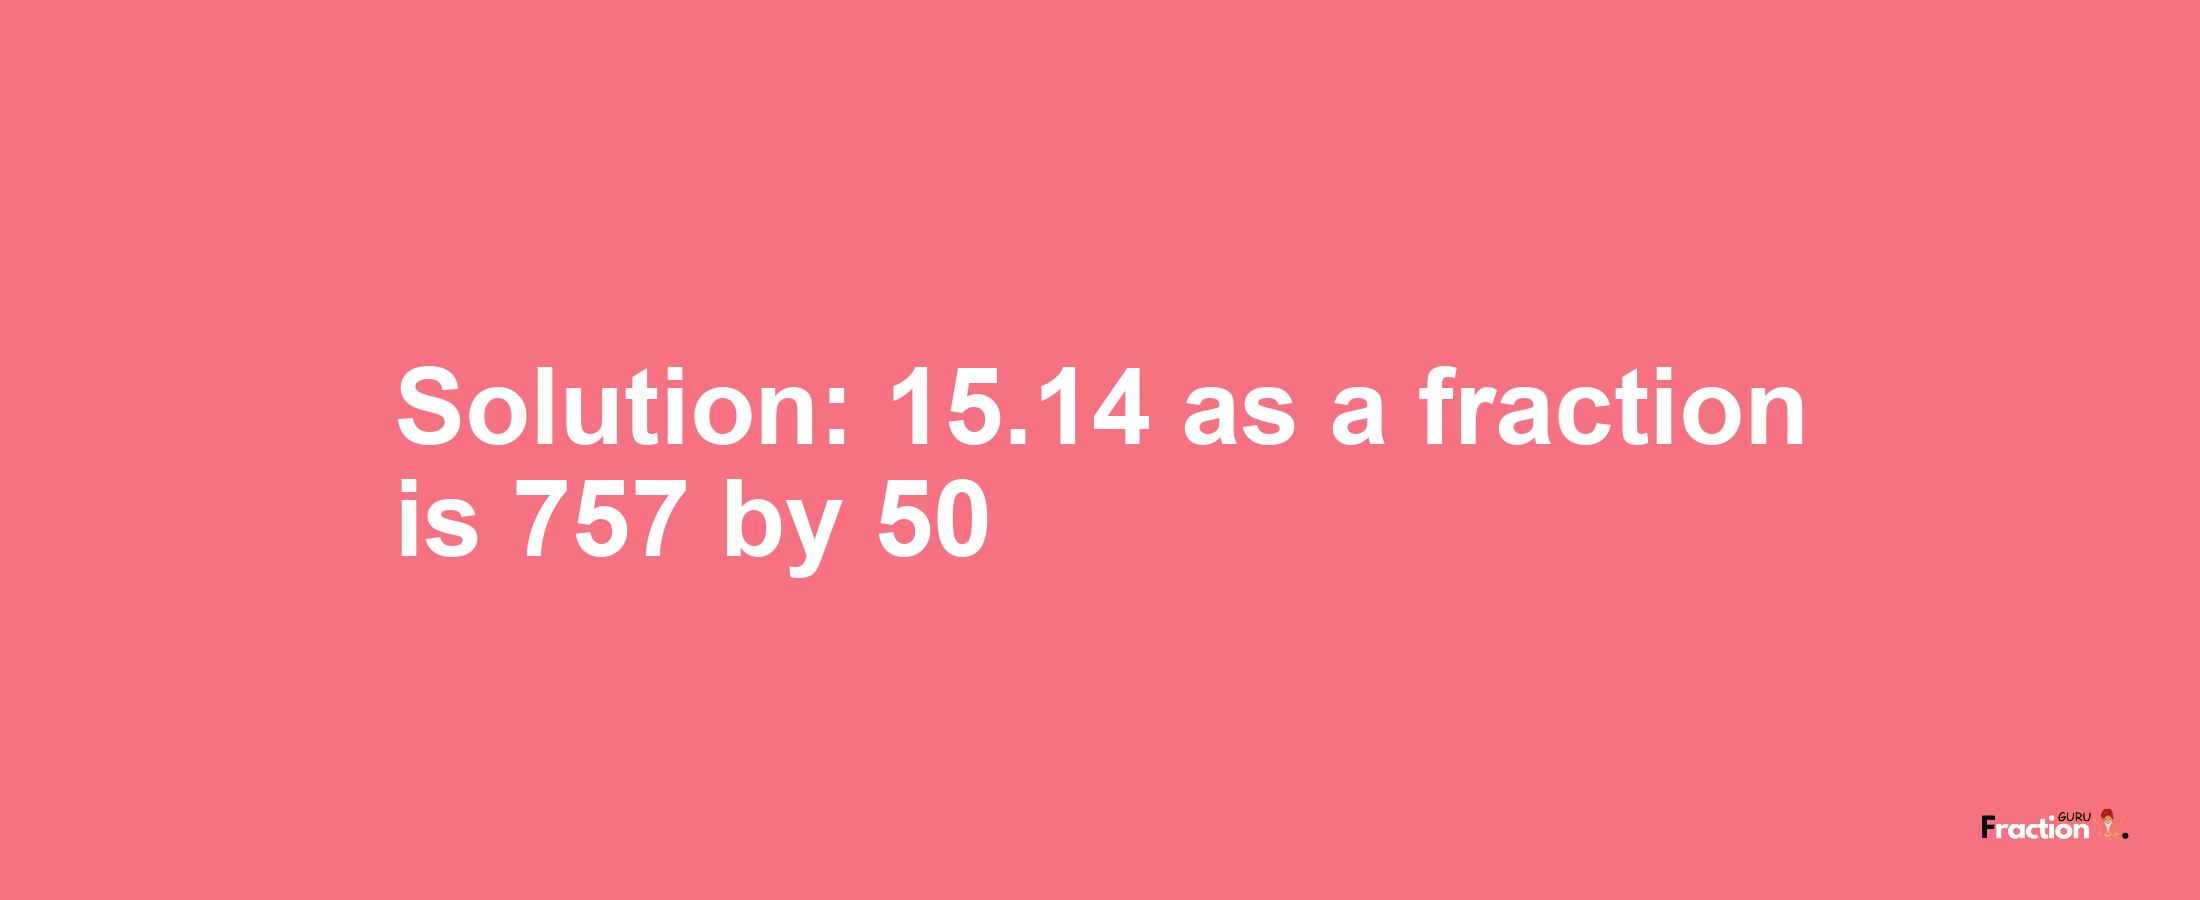 Solution:15.14 as a fraction is 757/50